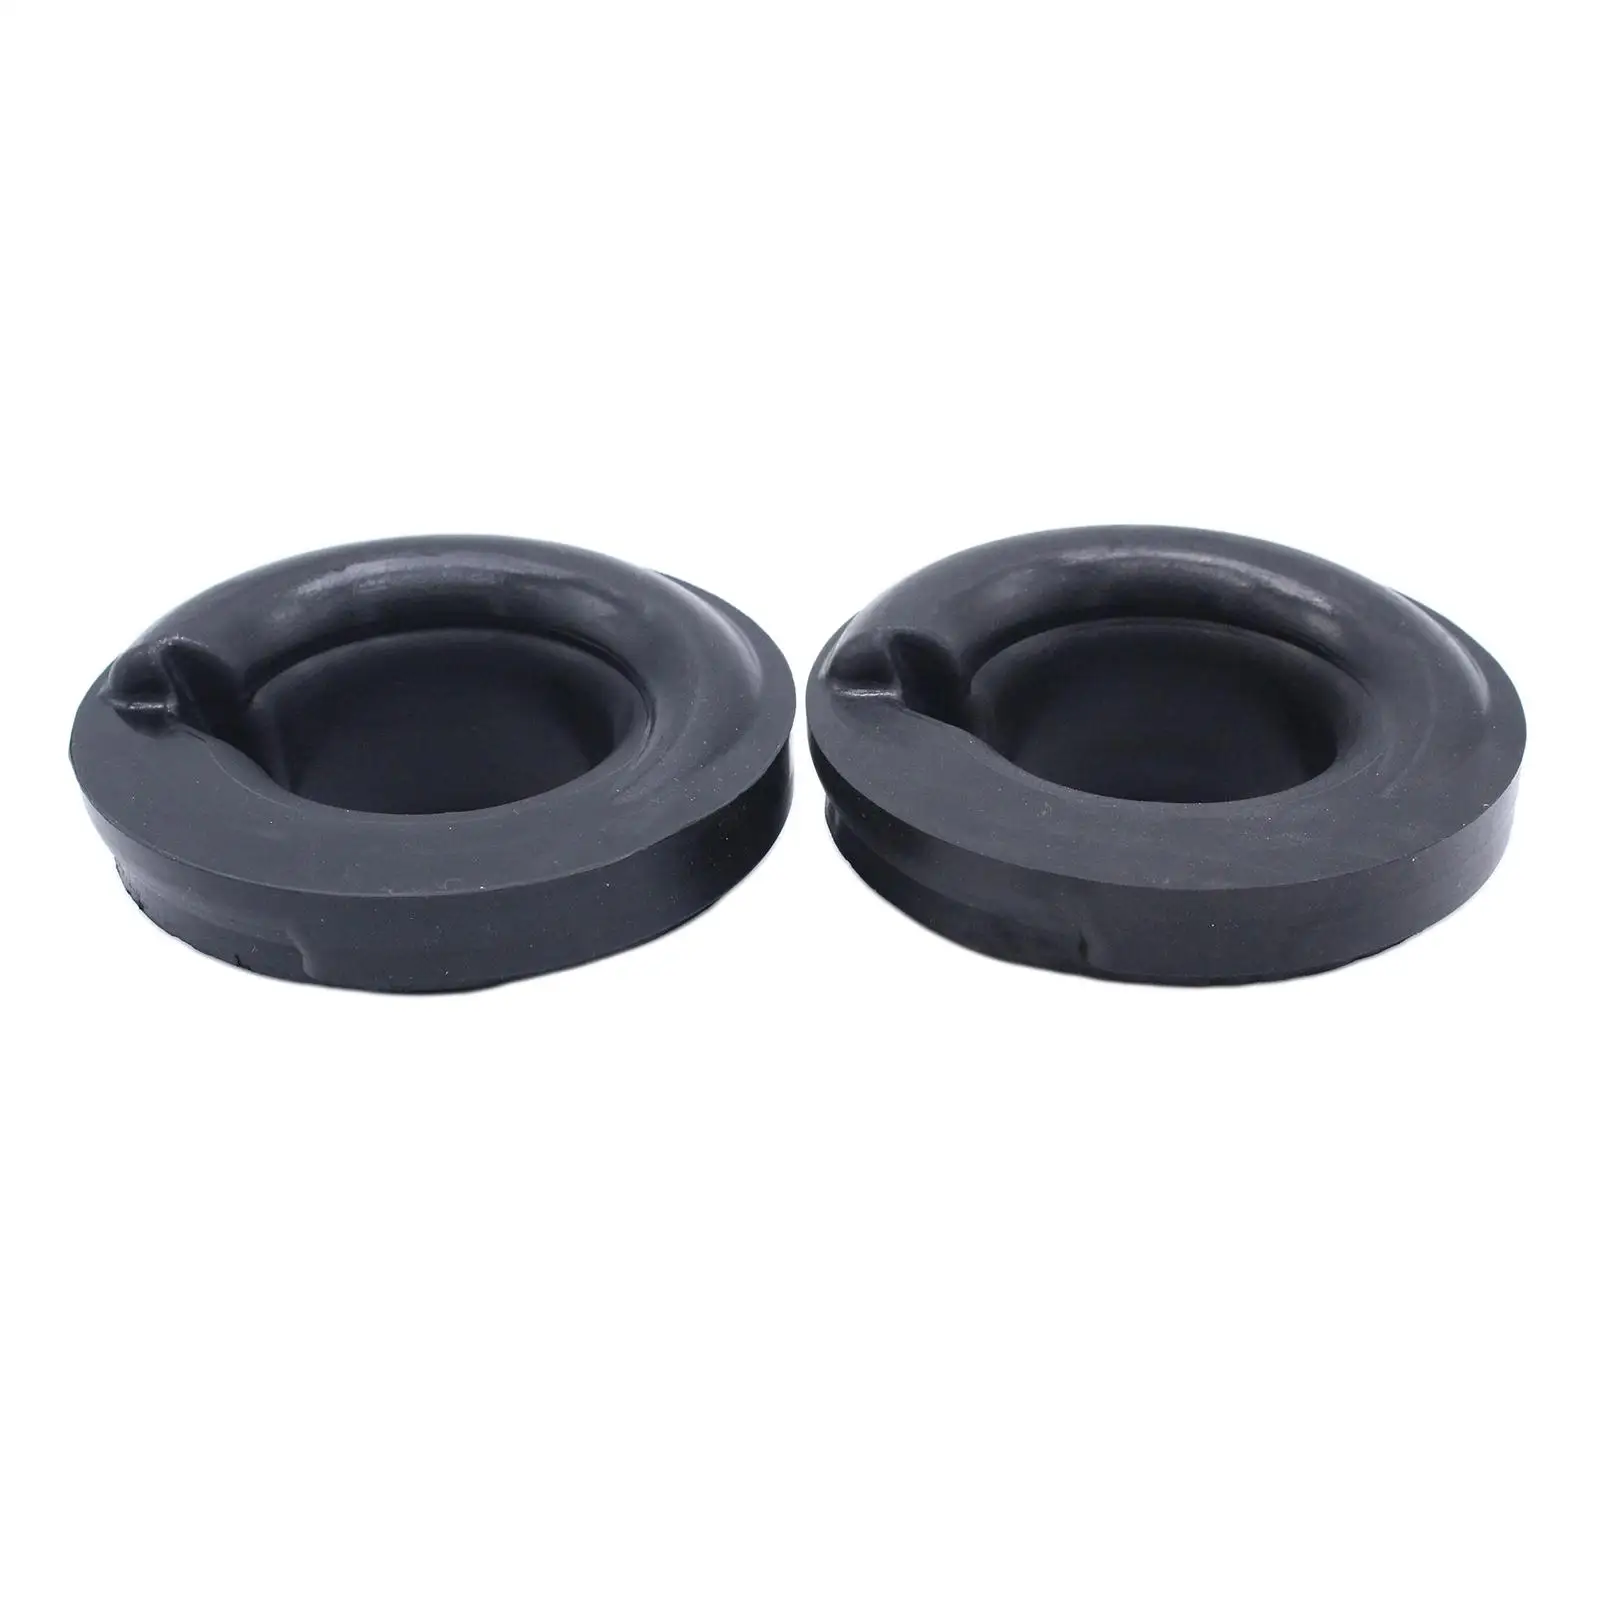 Car Rear Lower Spring Rubber Cup Mount Mounting Cups Fit for VW T5 Transporter 1.9 2.0 2.5 2003-2015 Cups Support Black